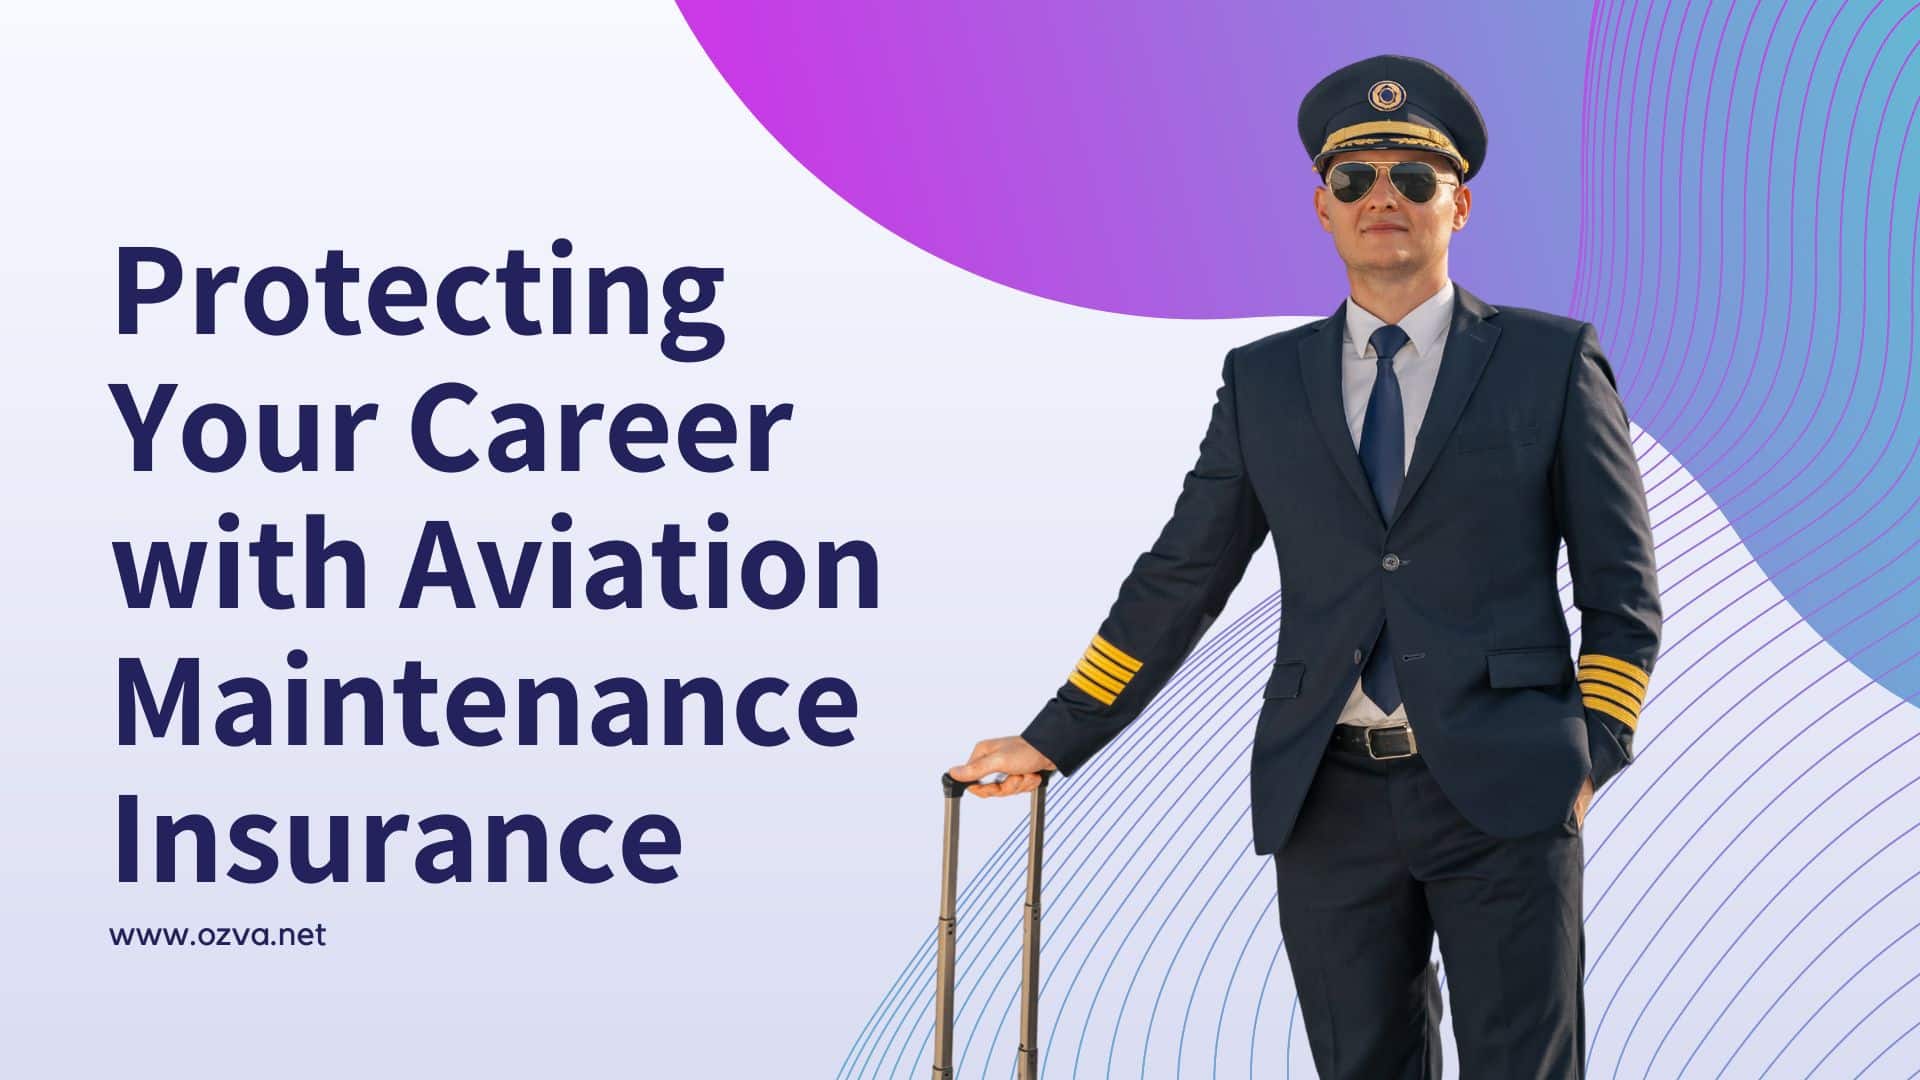 Aviation Institute of Maintenance: Protecting Your Career with Aviation Maintenance Insurance